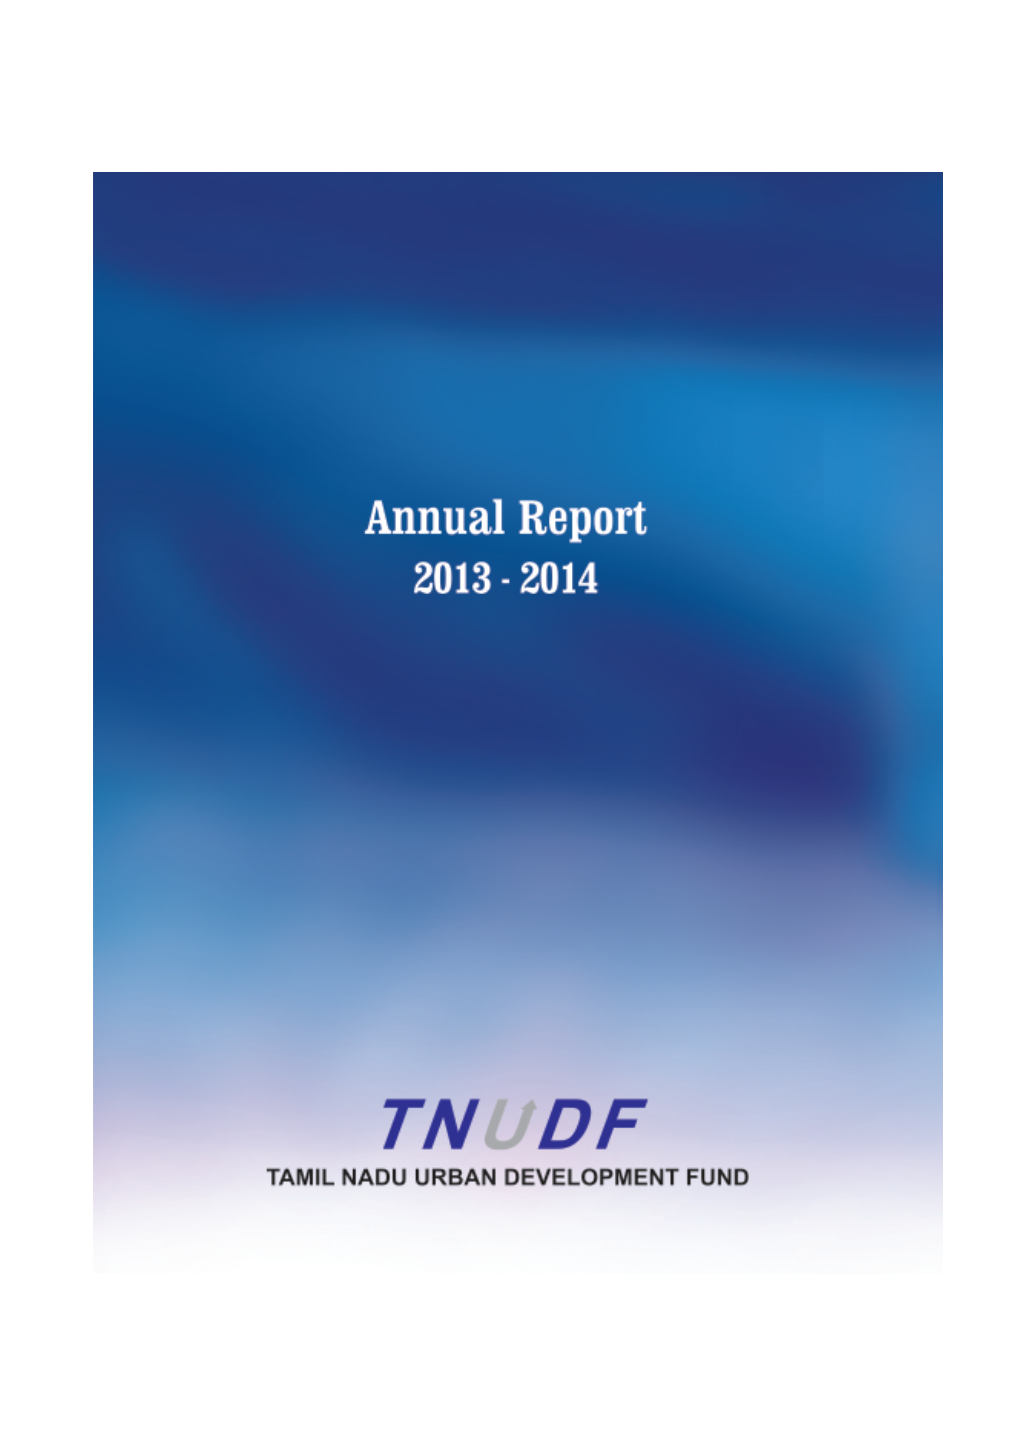 Annual Report (FY 2013-14)